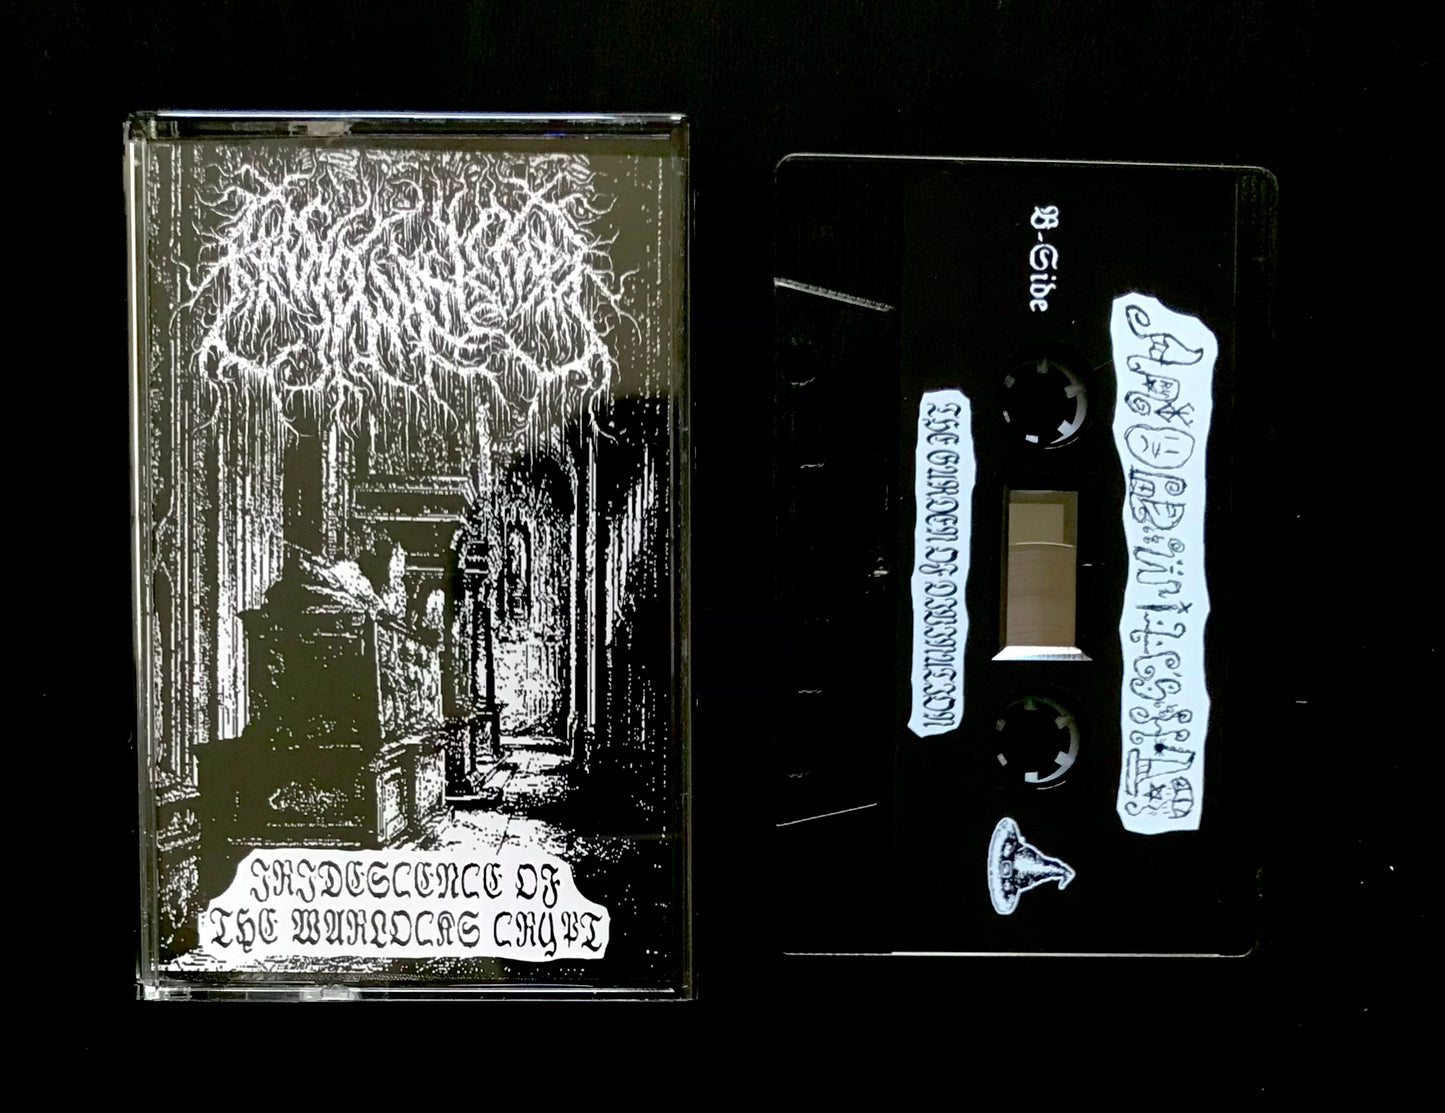 An Old's Witch Hat (Can) "Iridescence of the Warlock's Crypt" - Pro Tape